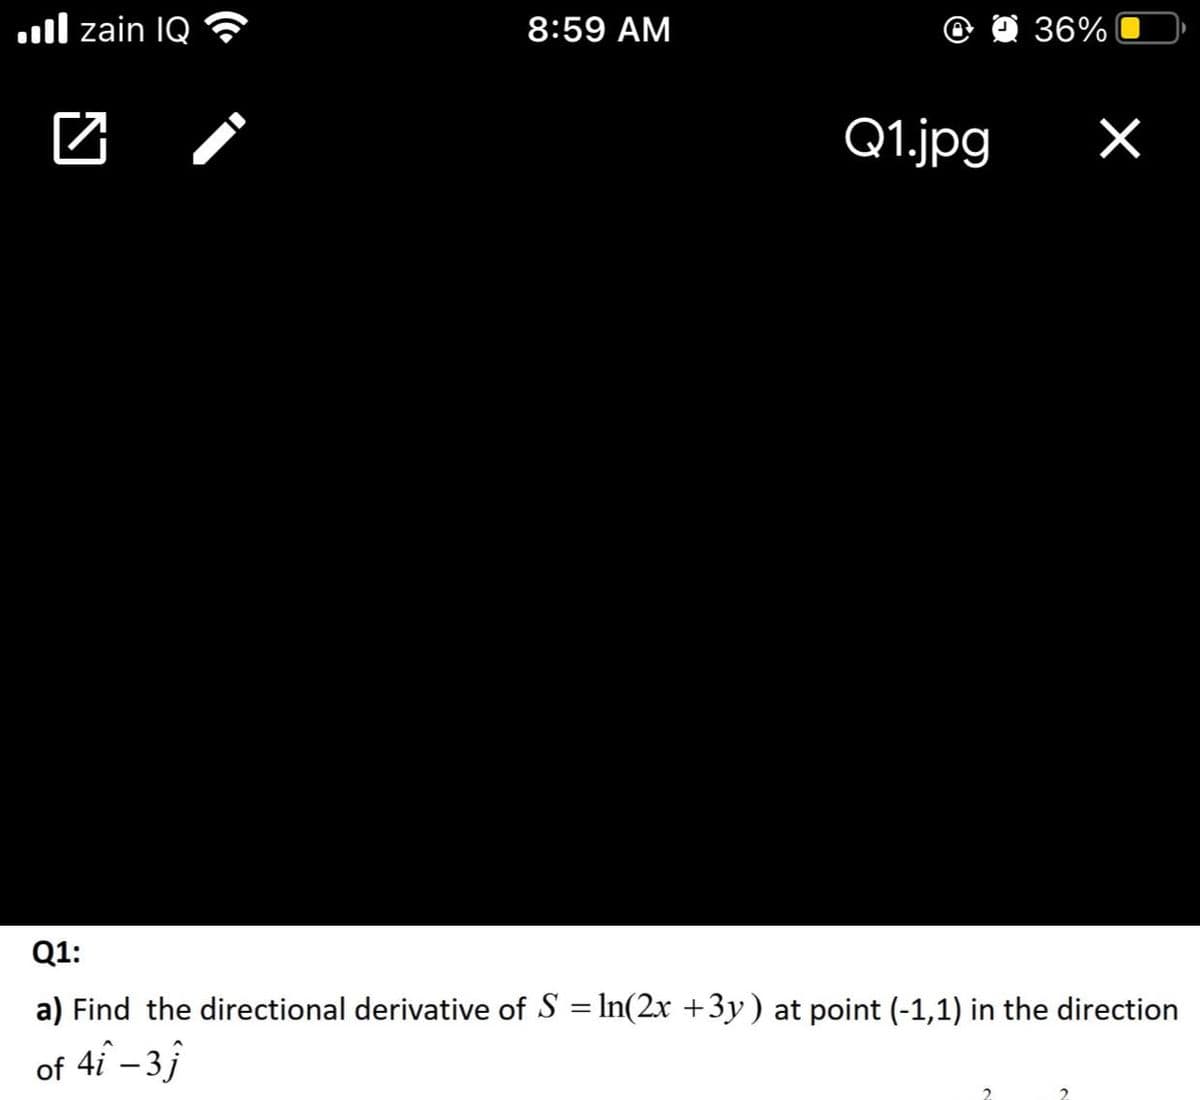 .ll zain IQ
8:59 AM
O 36%
Q1.jpg
Q1:
a) Find the directional derivative of S = In(2x +3y) at point (-1,1) in the direction
of 4i – 3j
